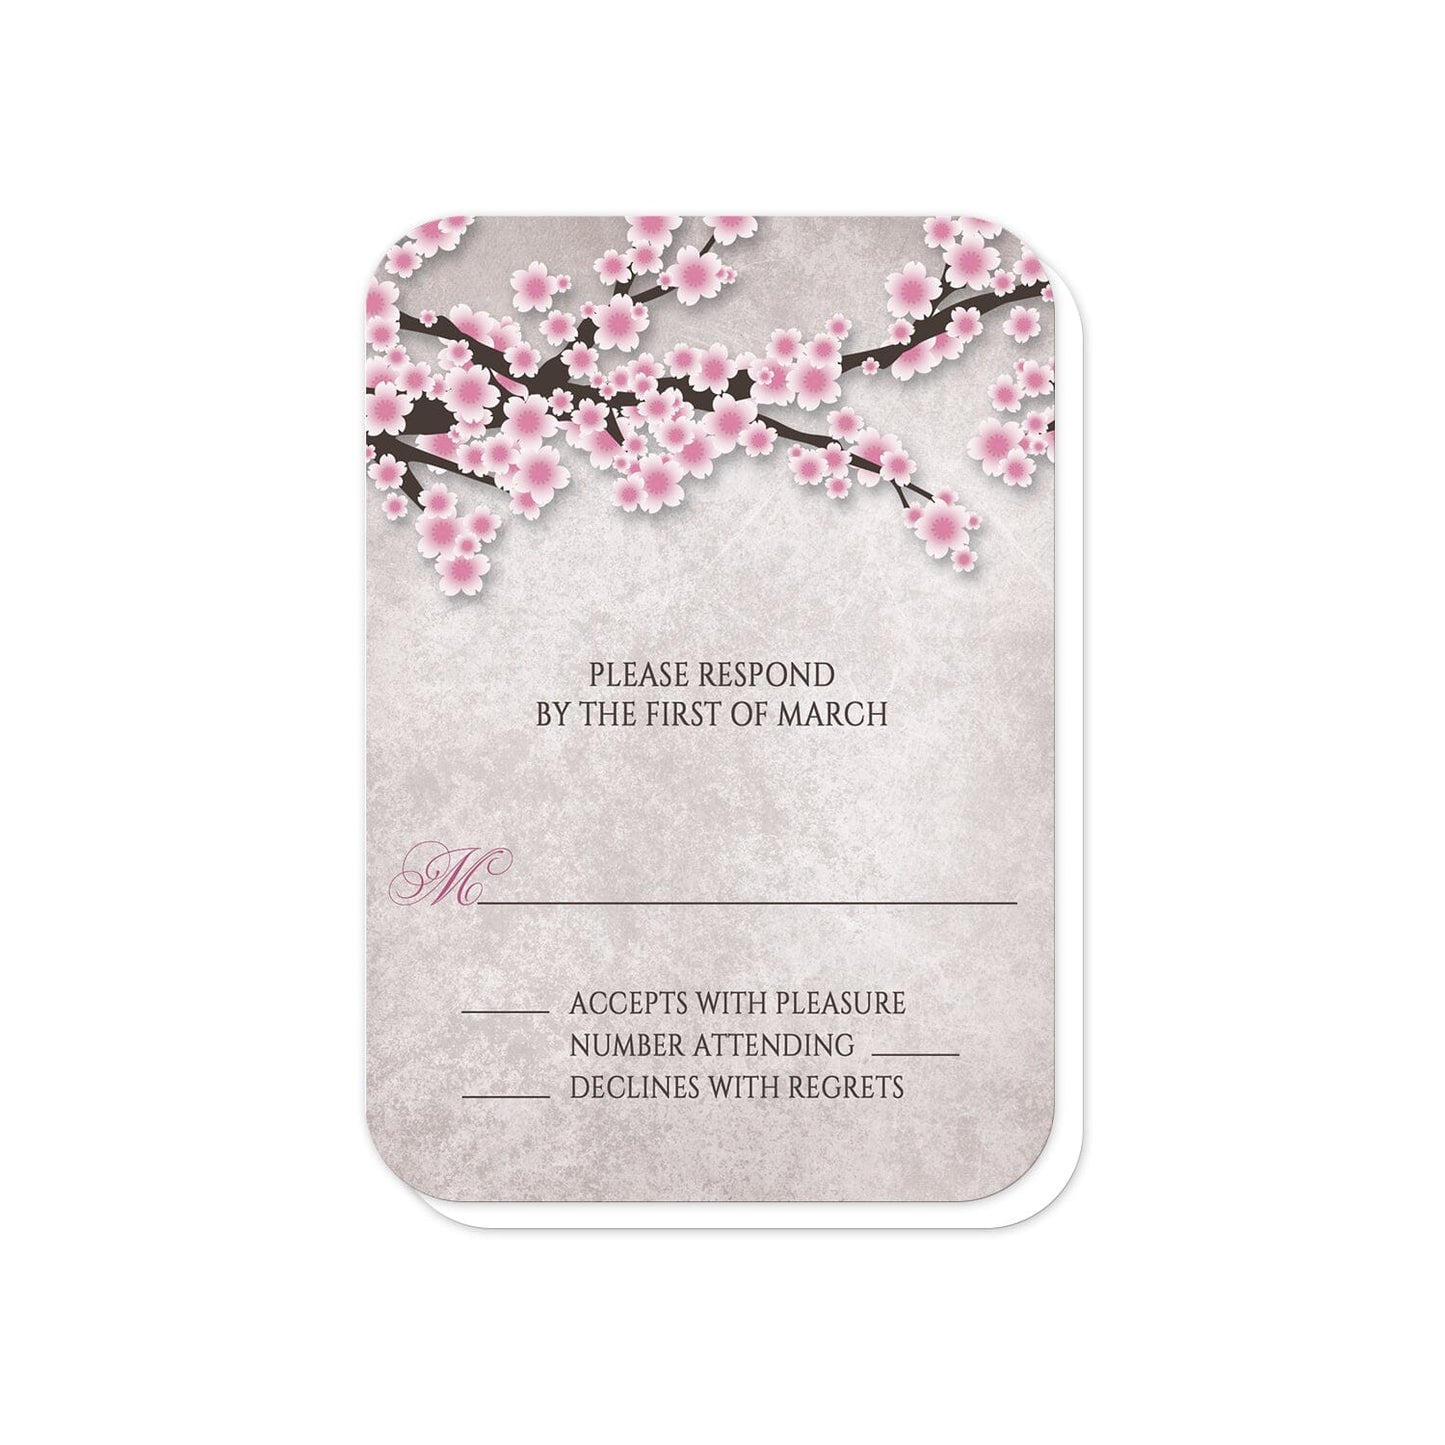 Rustic Pink Cherry Blossom RSVP Cards (with rounded corners) at Artistically Invited.